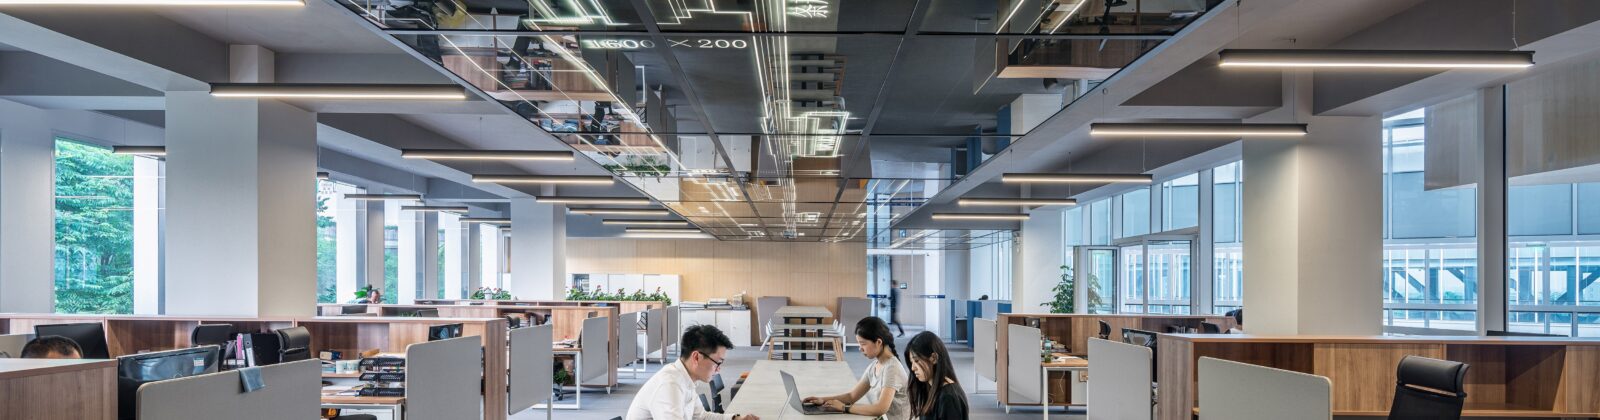 Three people at a desk in a large open office space